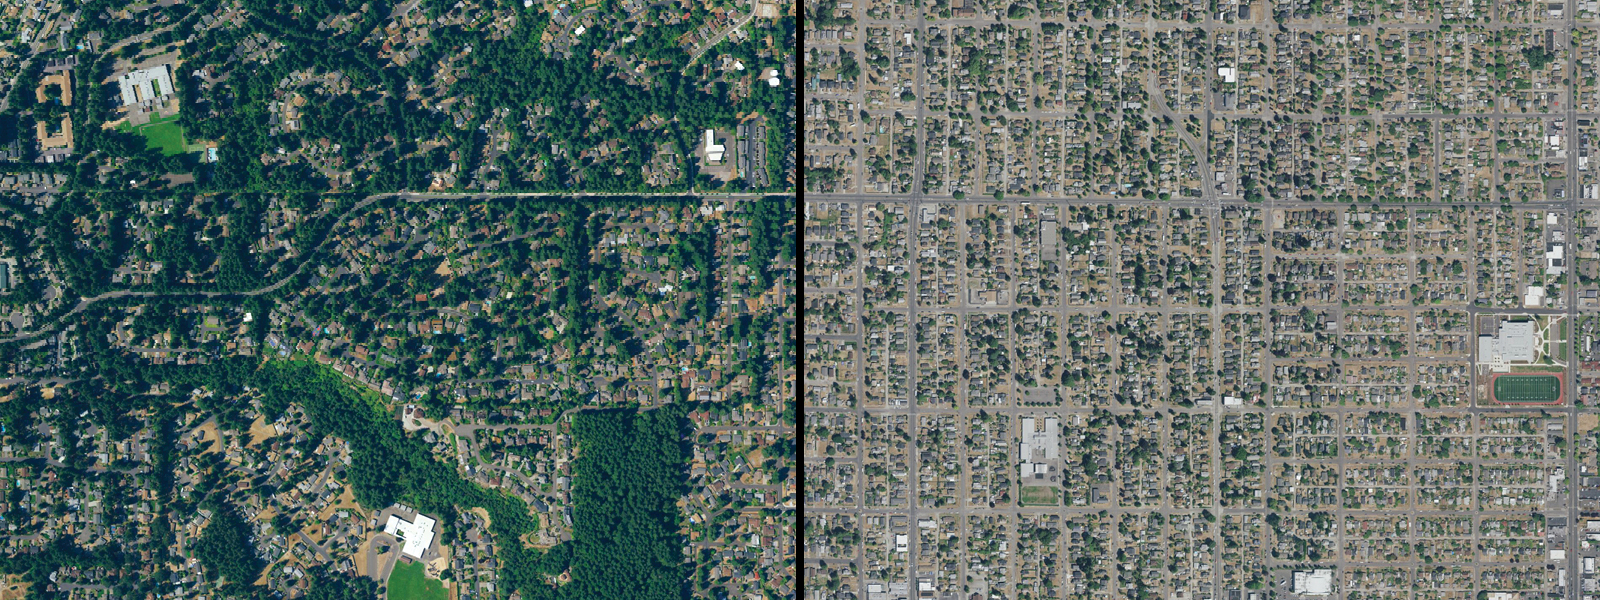 Comparative illustration showing urban neighborhoods with and without dense tree canopy.